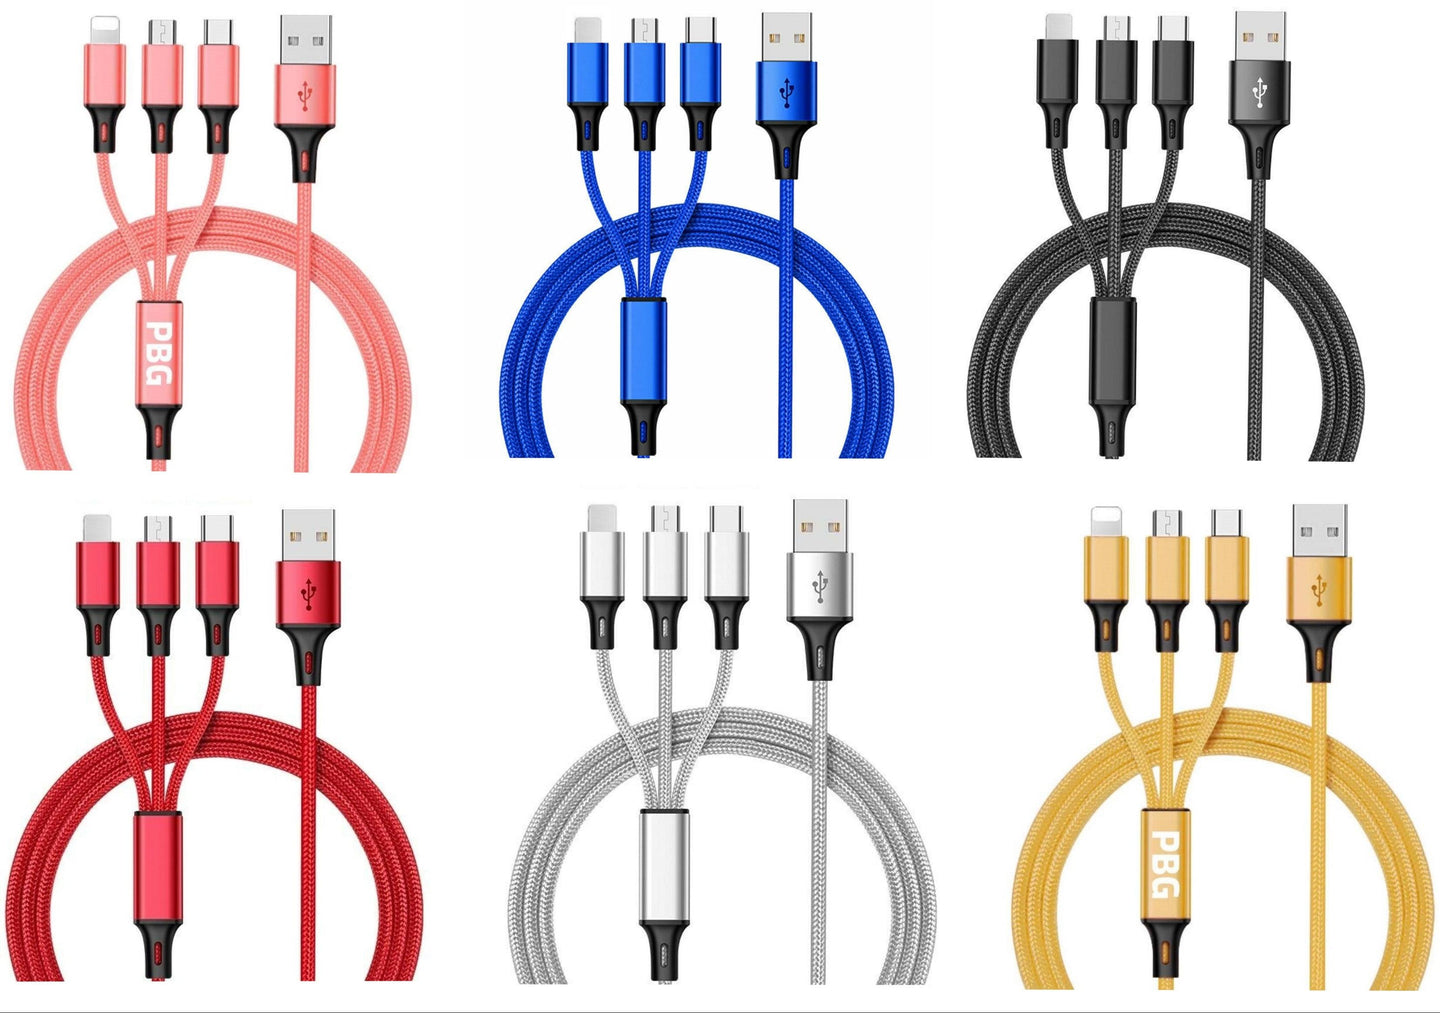 Multicolor PBG 3-in-1 Fast Charging Cable | USB charging cable